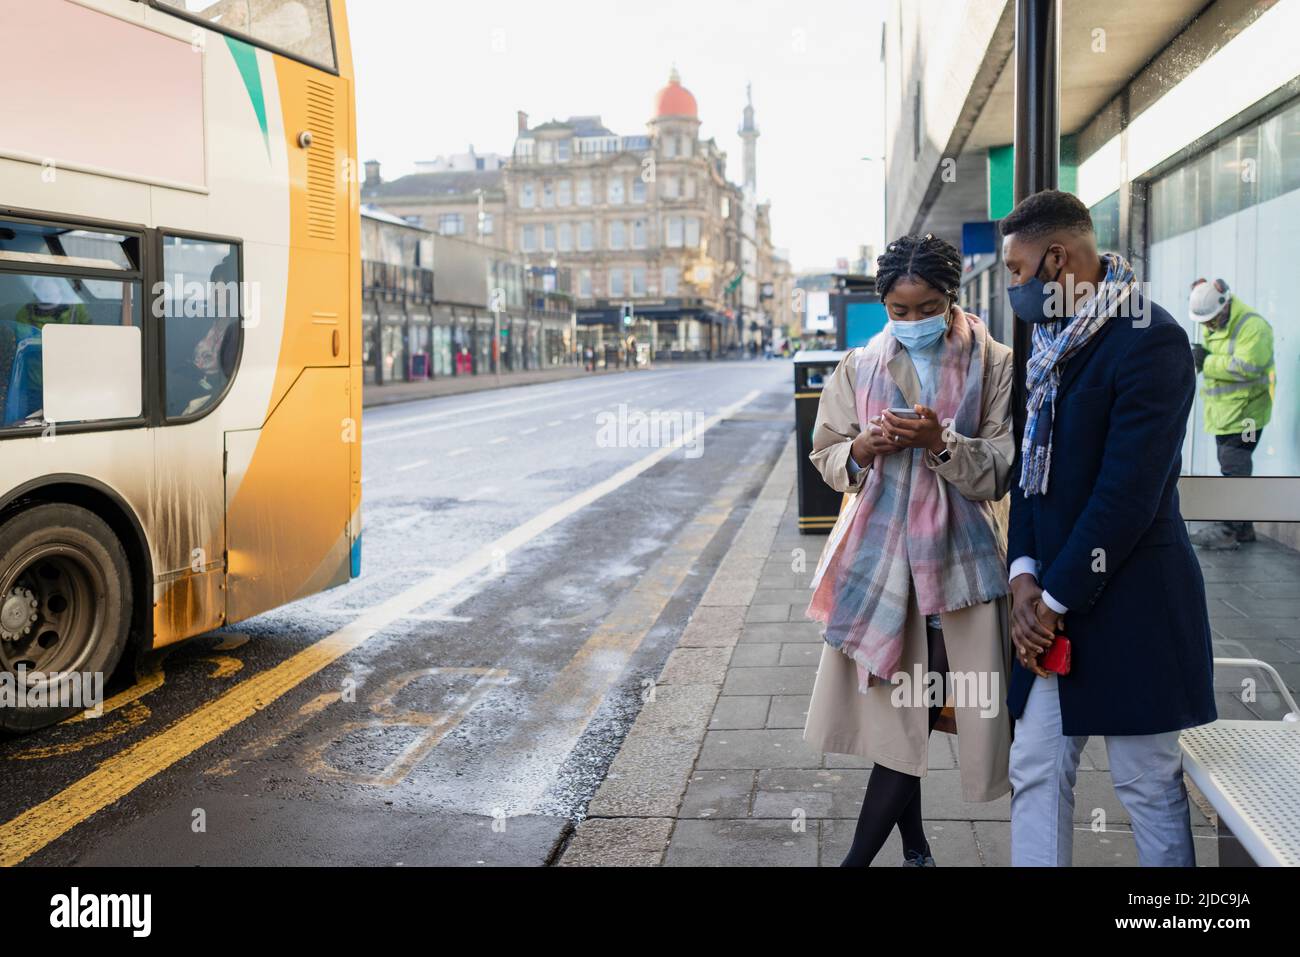 Couple waiting for bus weraing face coverings, looking at app on mobile, checking bus times Stock Photo